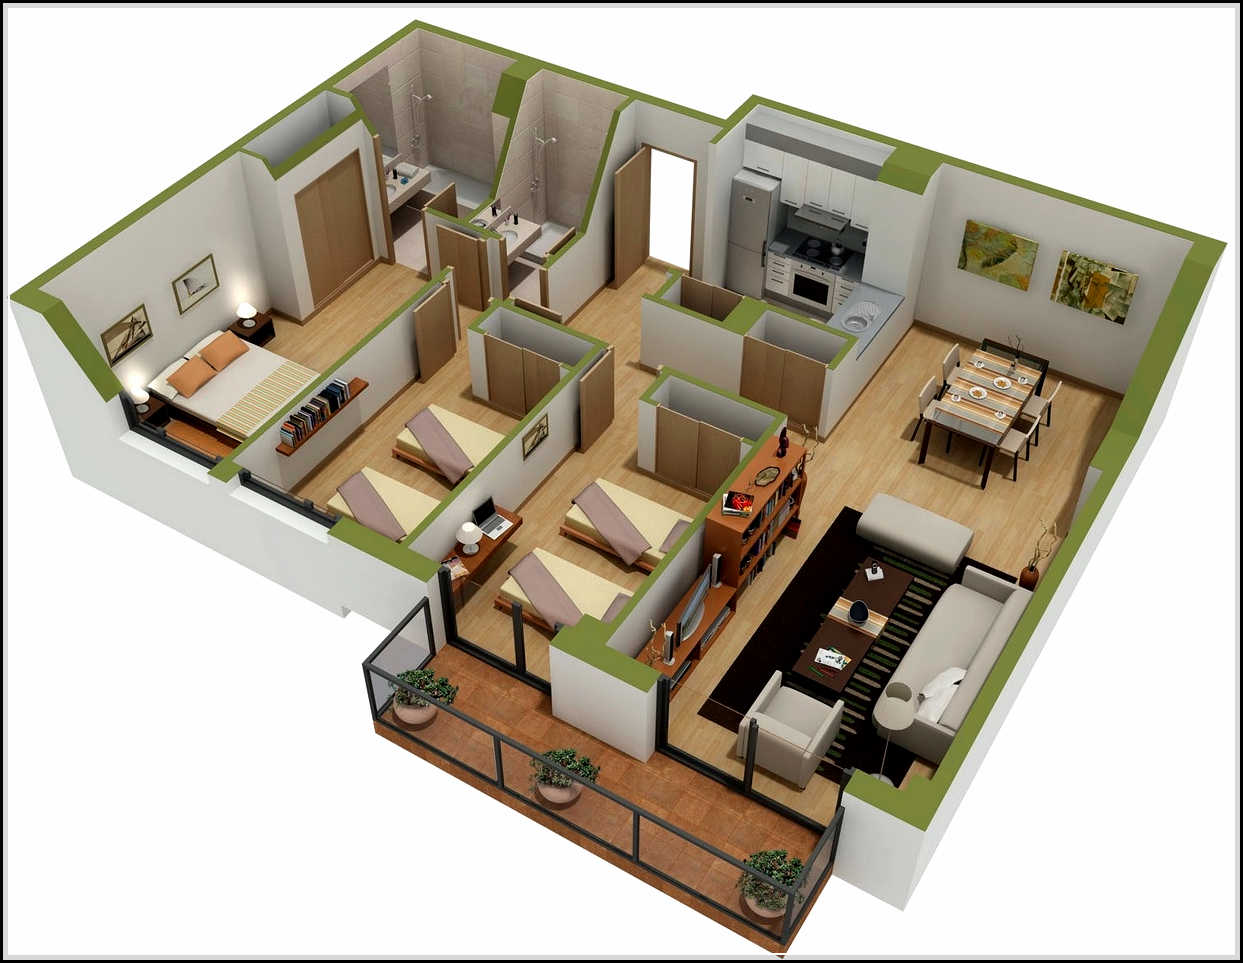 Exquisite House/Apartment Floor Plans | Engineering Discoveries